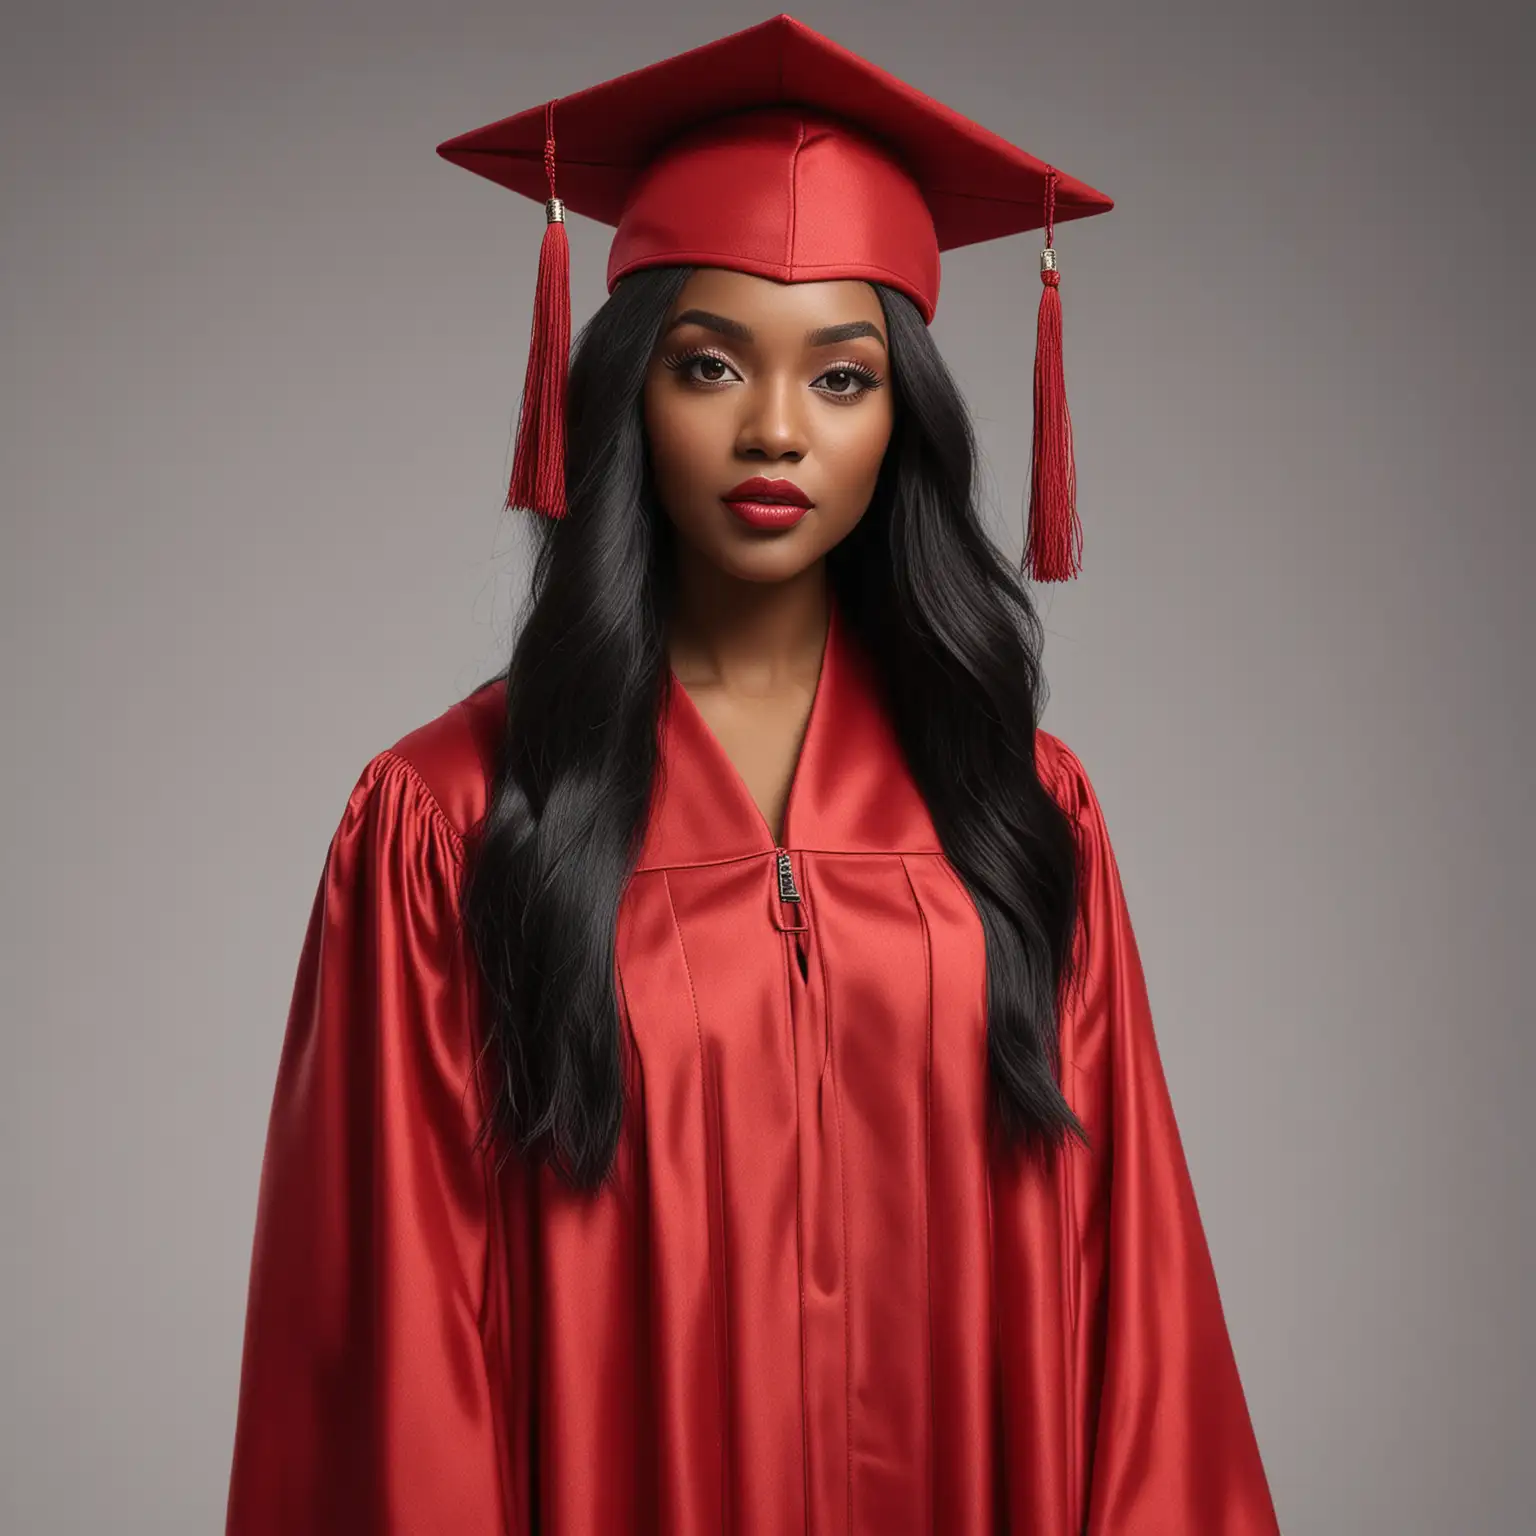 Stunning Black Female Graduate Portrait in Red Cap and Gown